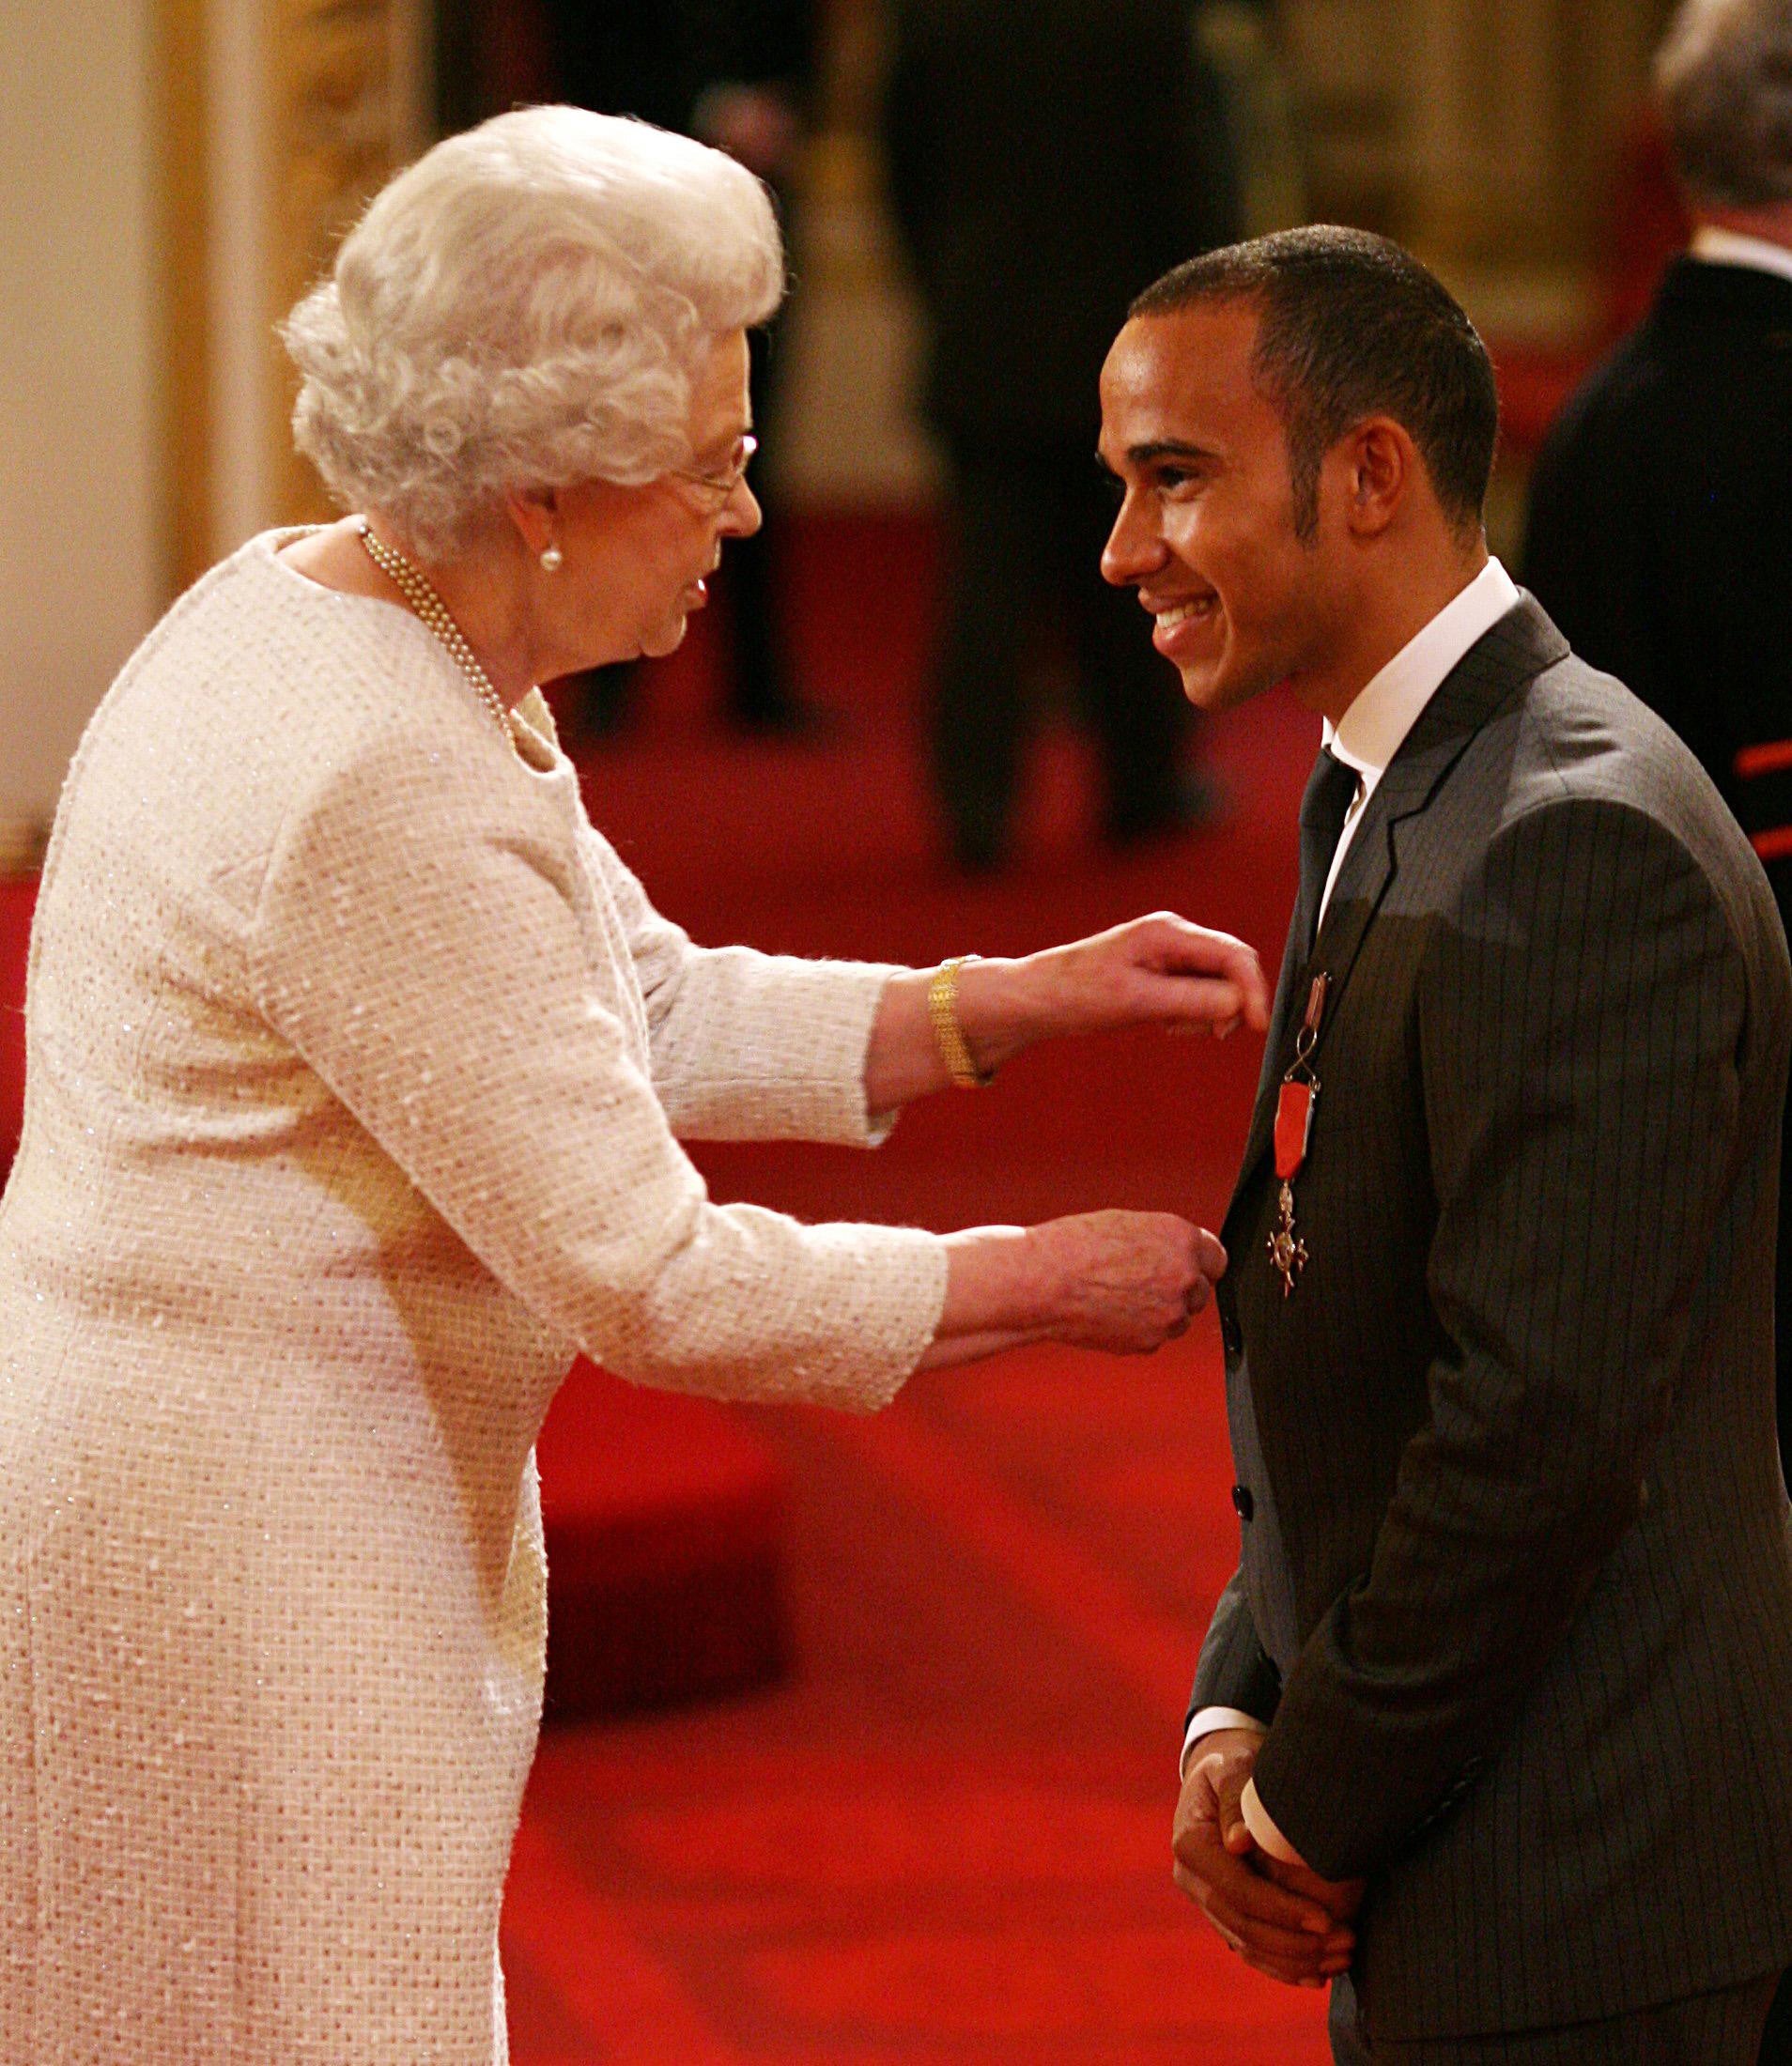 Hamilton received an MBE following his maiden world title win in 2008